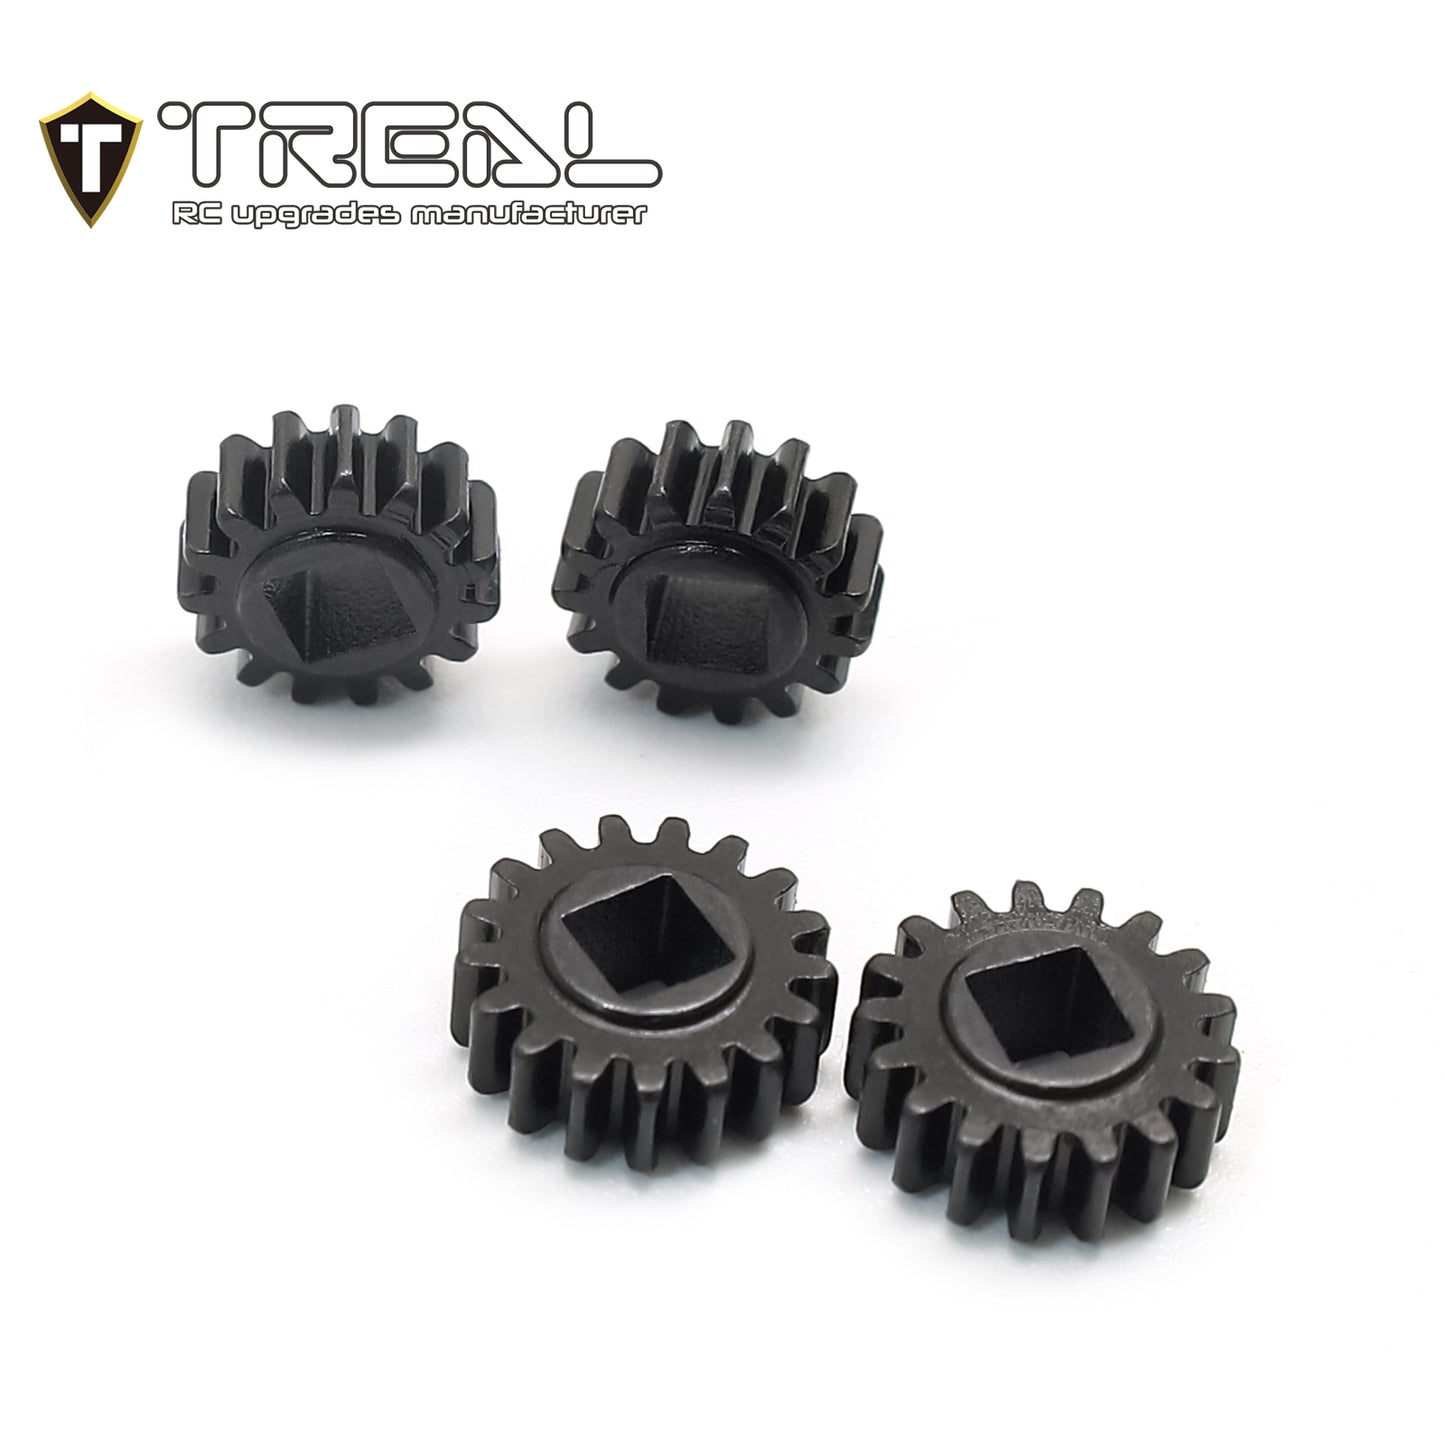 TREAL SCX24 Overdrive Portal Gears 15T/17T Harden Steel Gears Compatible with TREAL SCX24/TRX4M Portal Axles